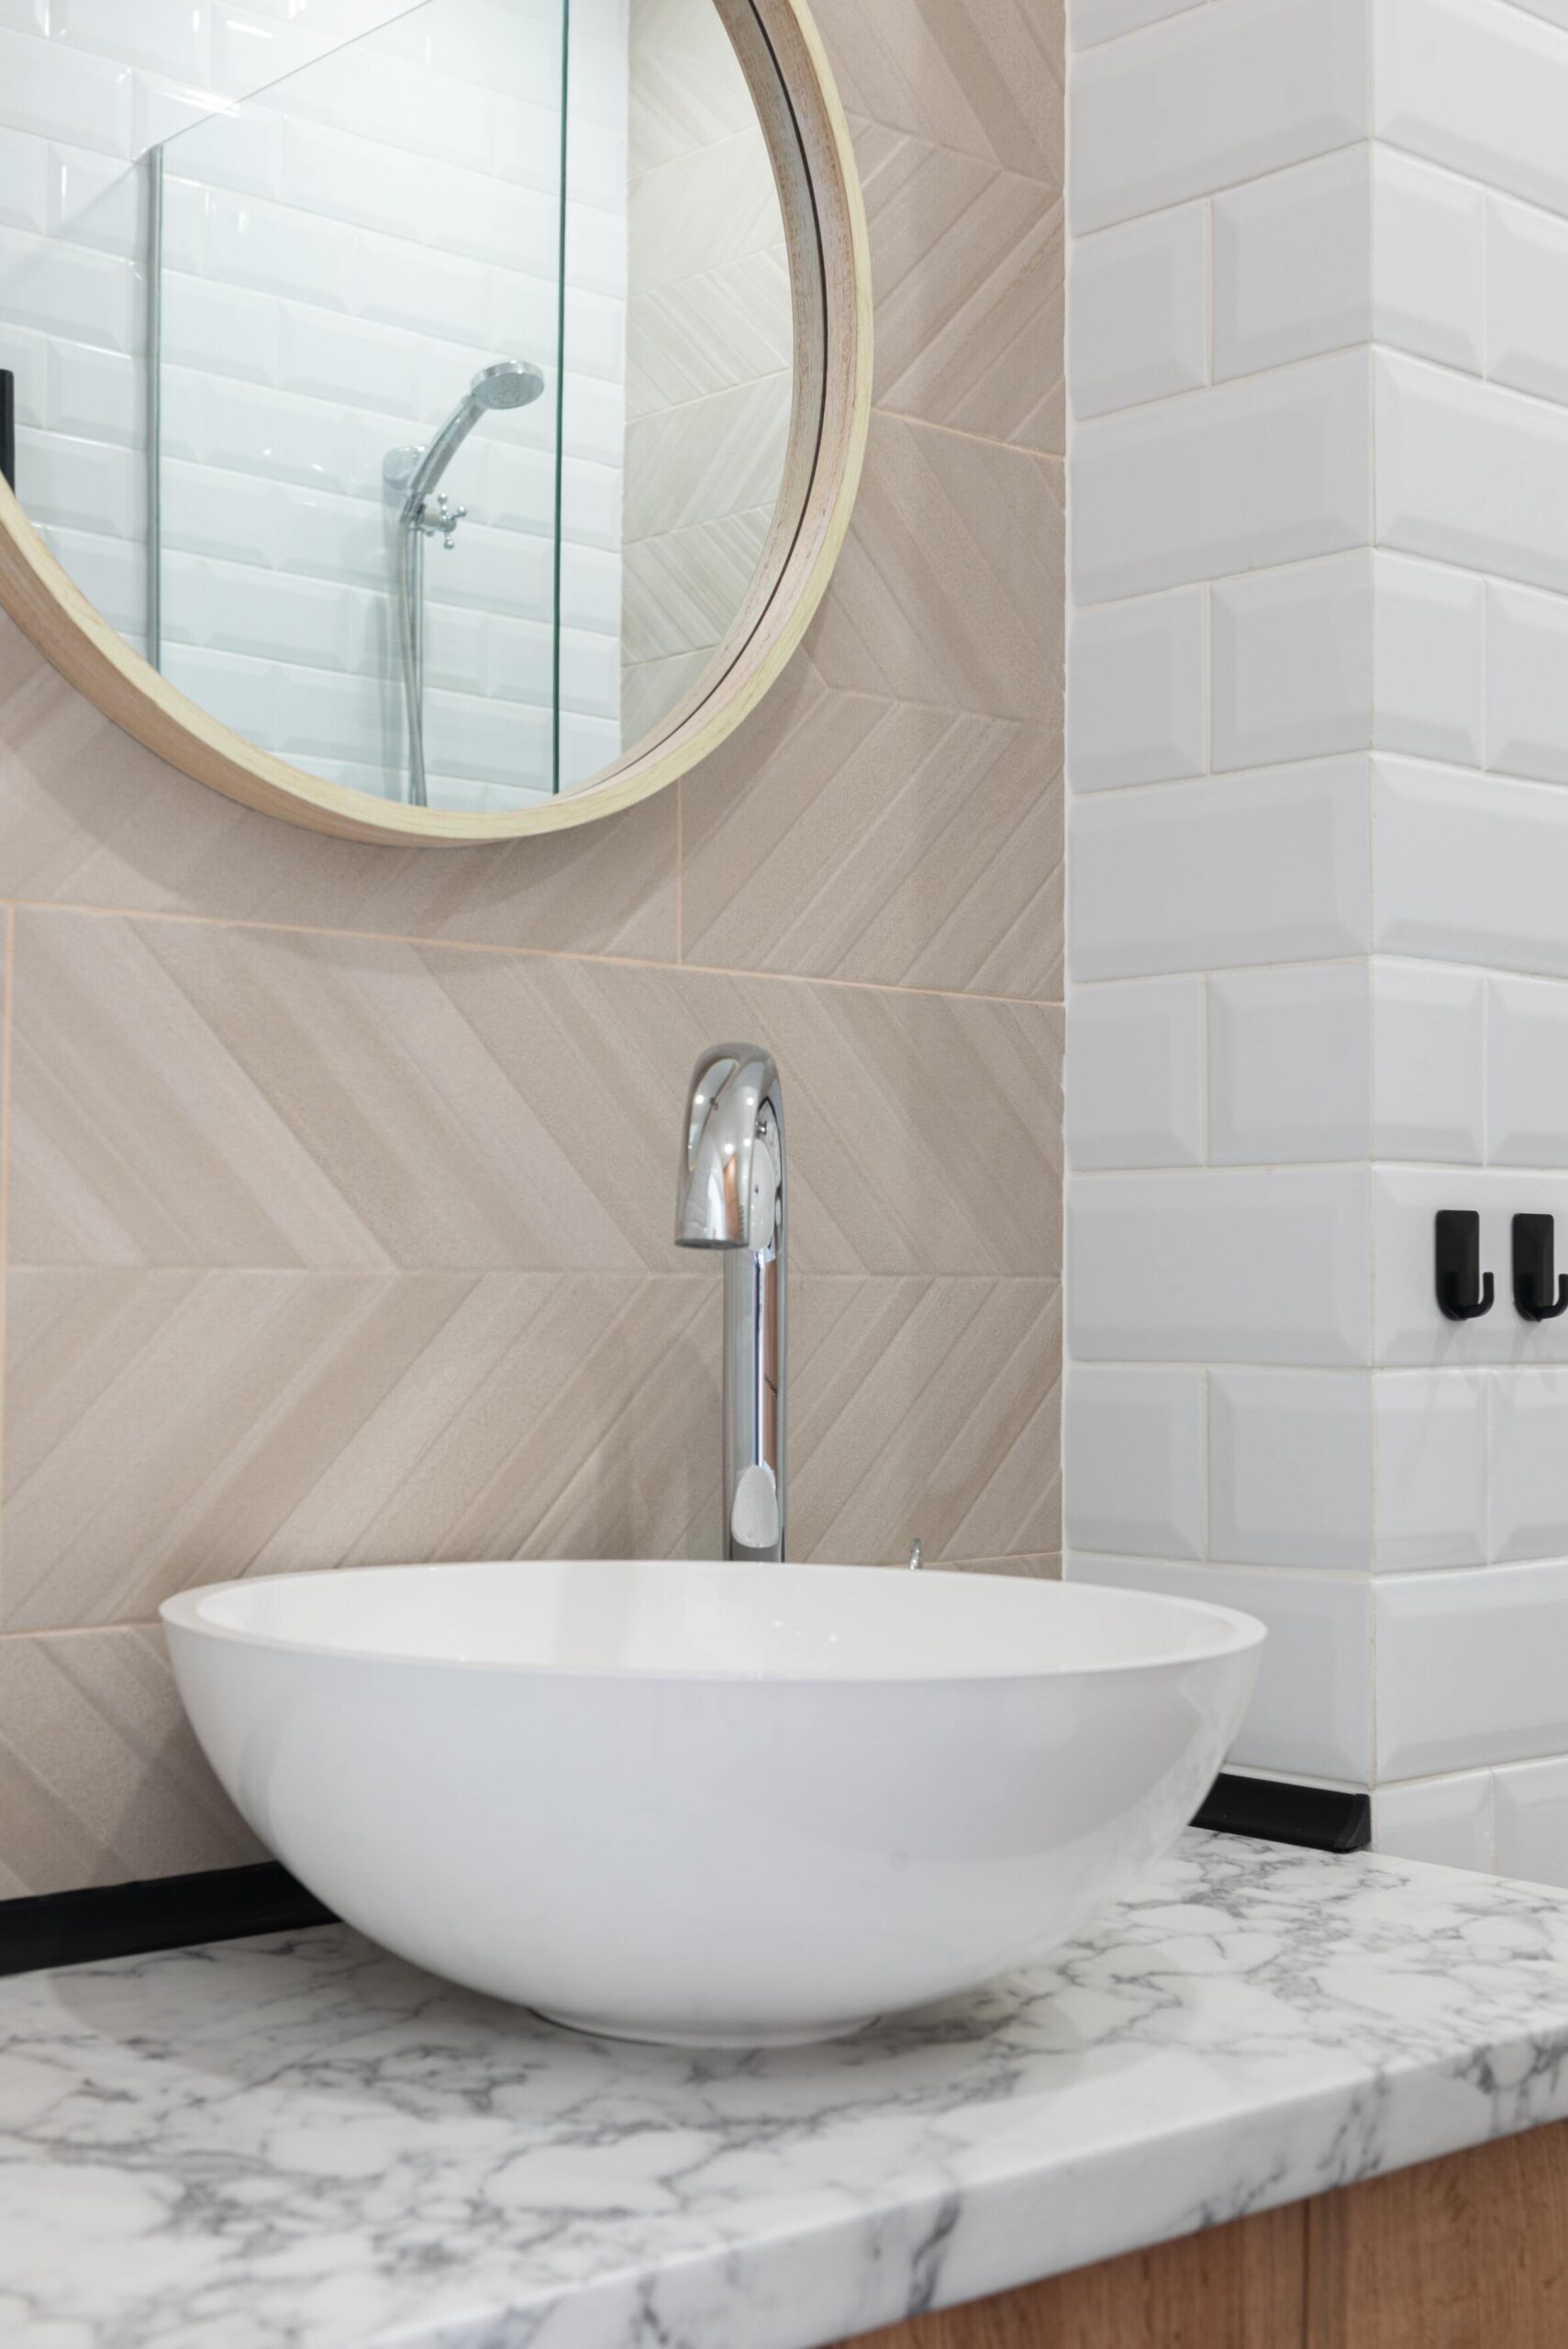 Bathroom Design and Installation Services in North London